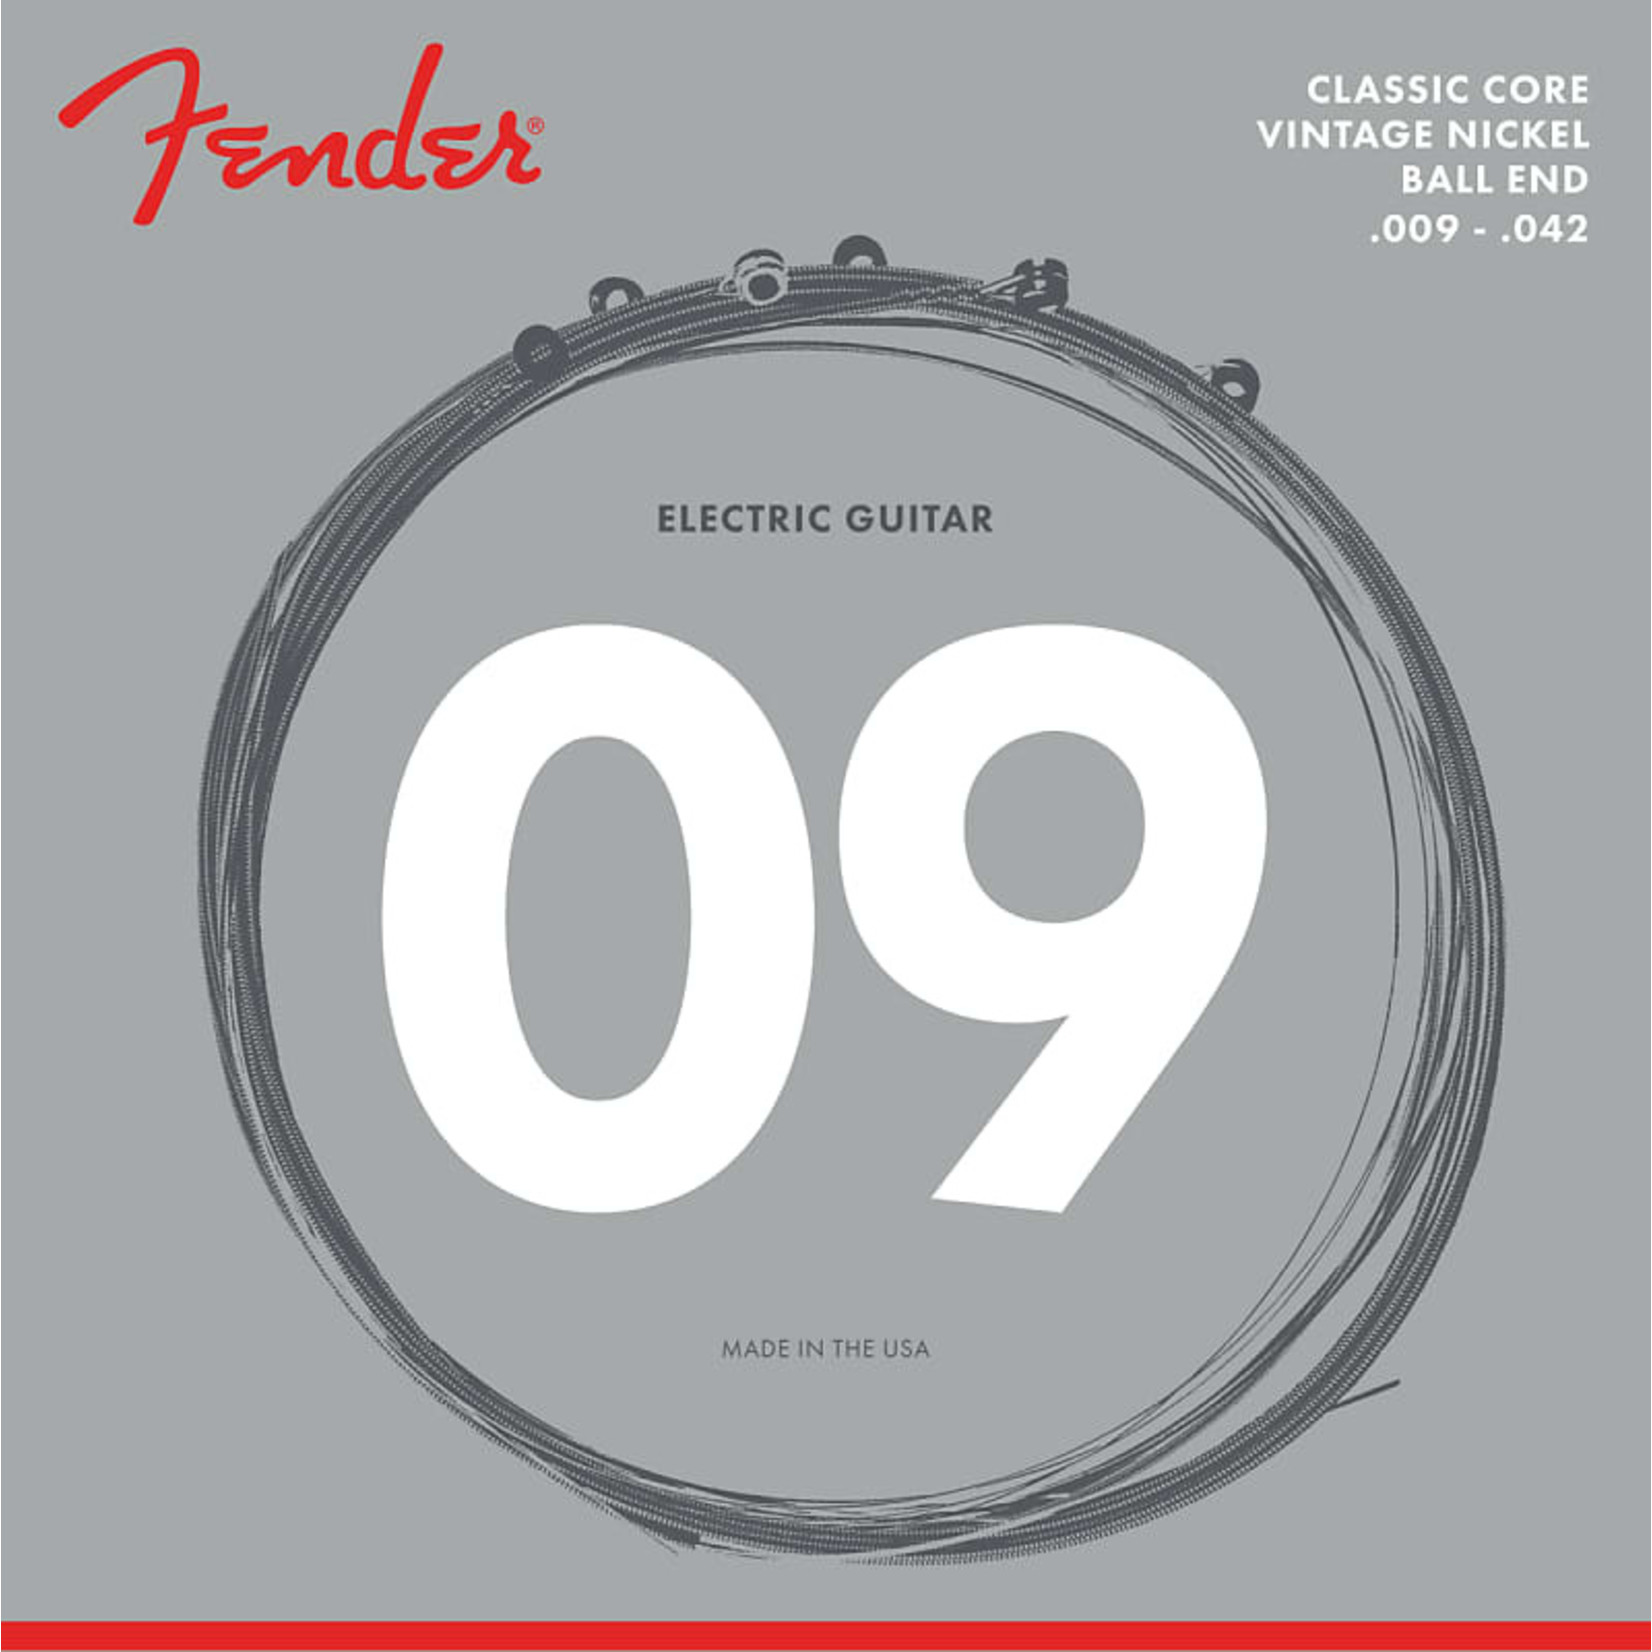 Fender Fender 9-42 Classic Core Electric Guitar Strings Ball End